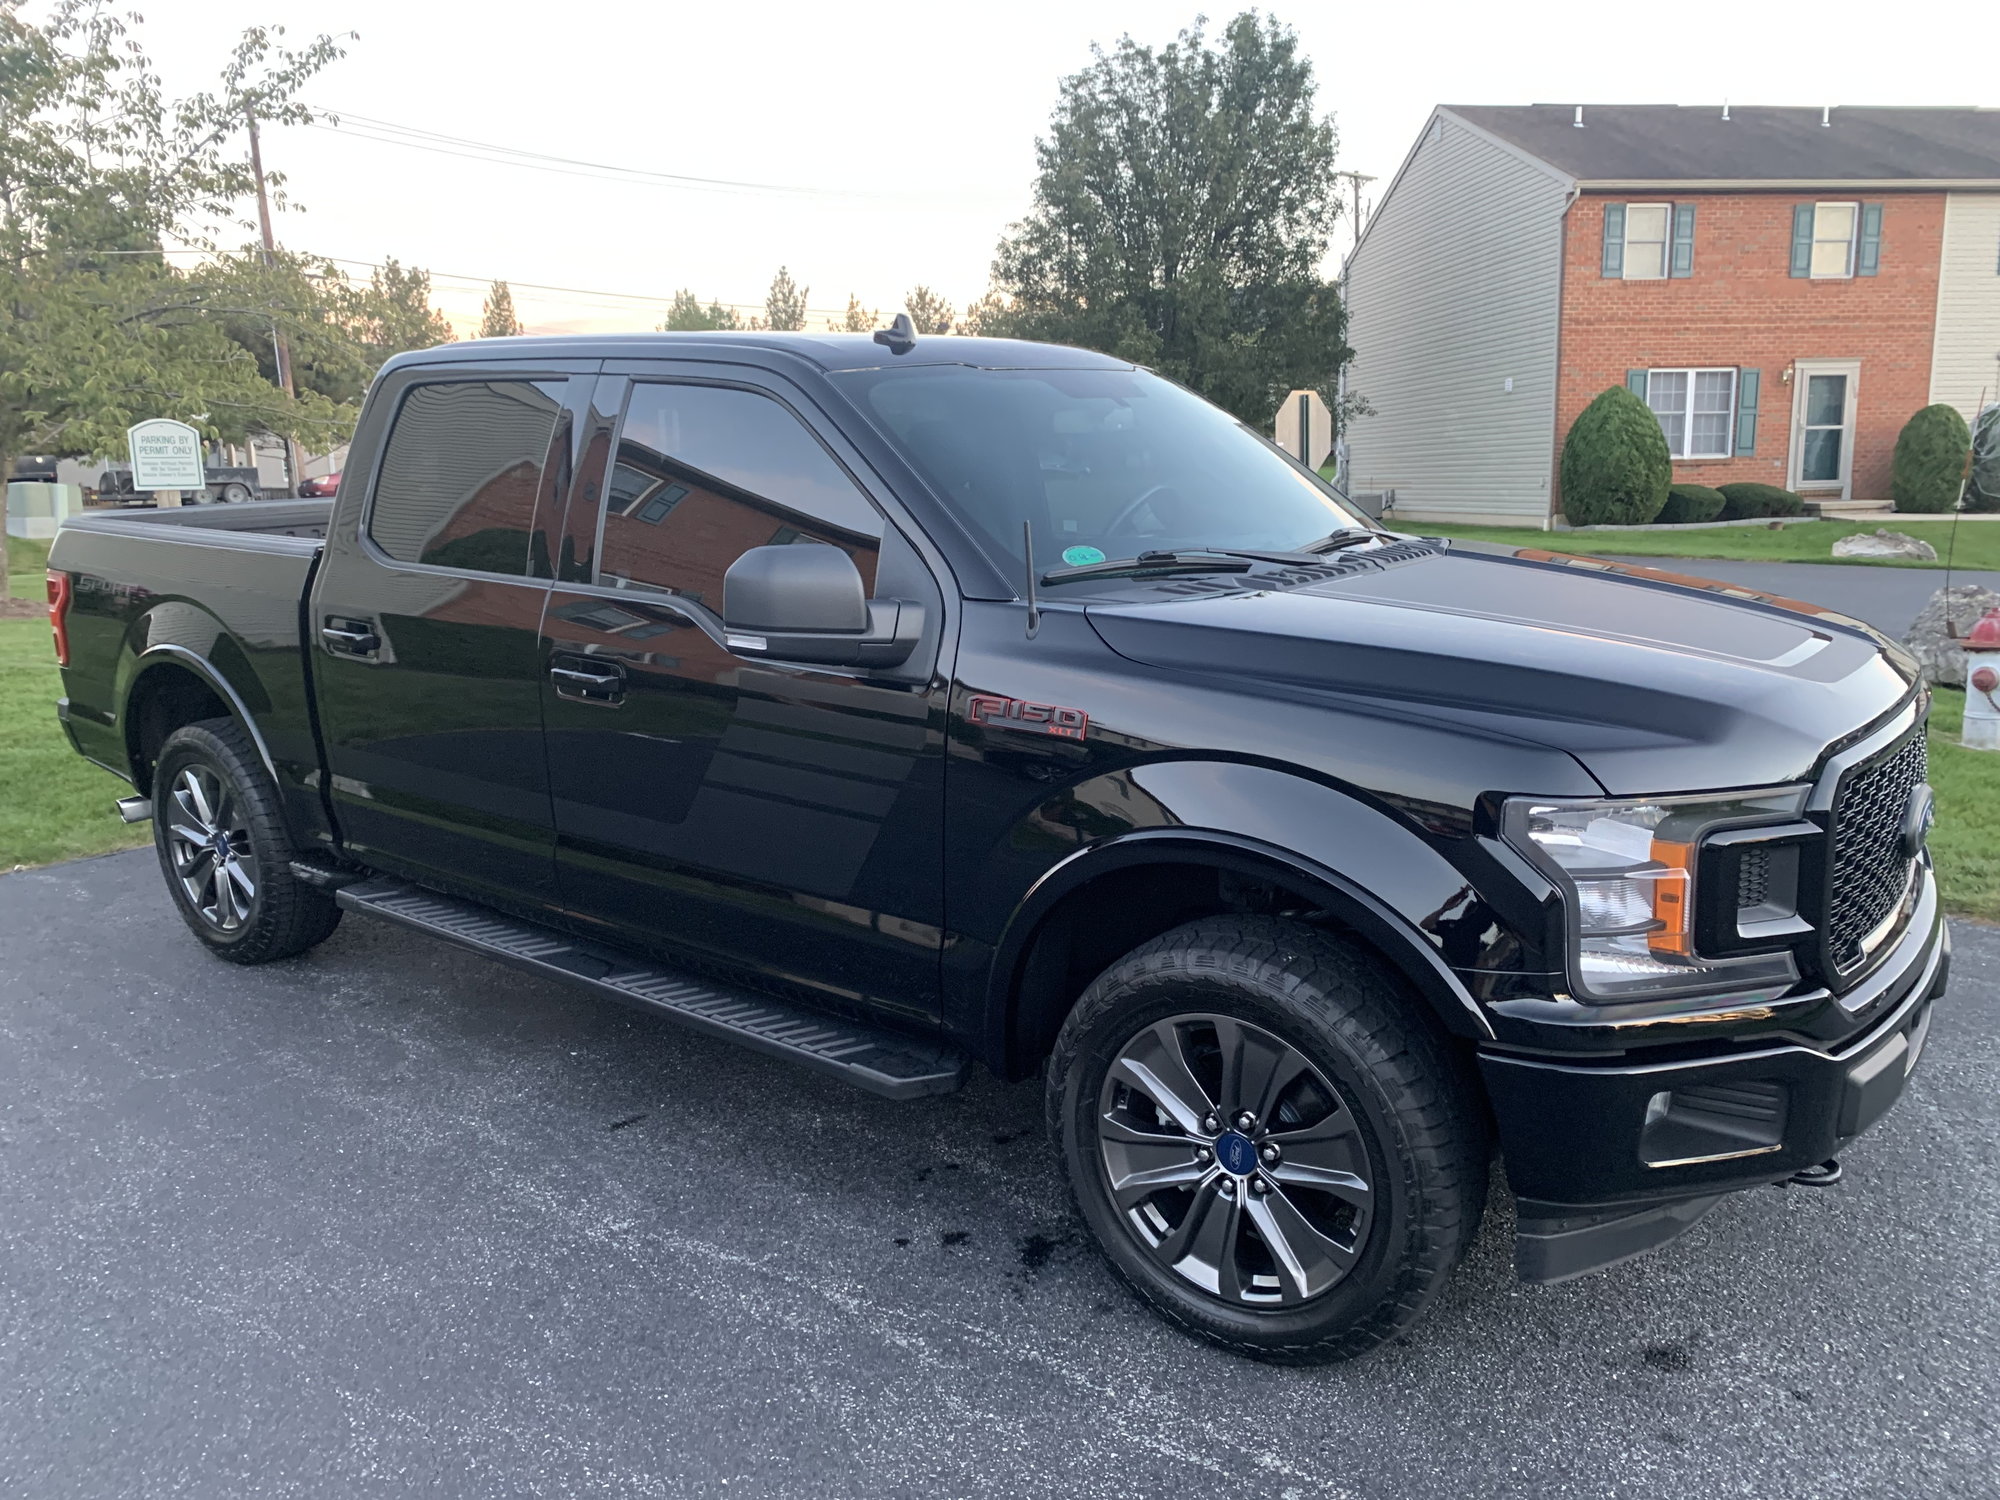 Painting calipers and tow hooks - Ford F150 Forum - Community of Ford Truck  Fans